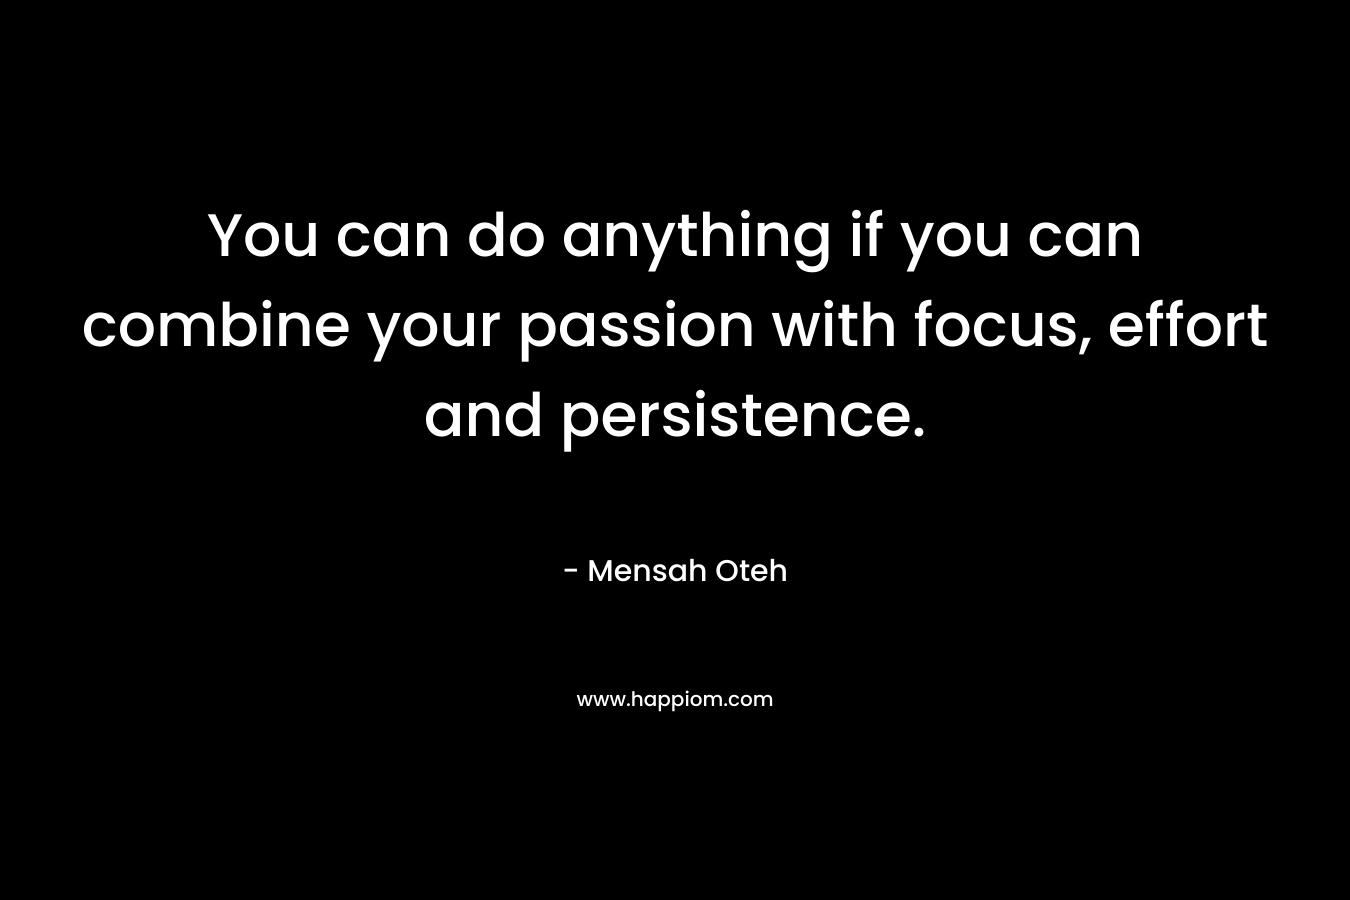 You can do anything if you can combine your passion with focus, effort and persistence.